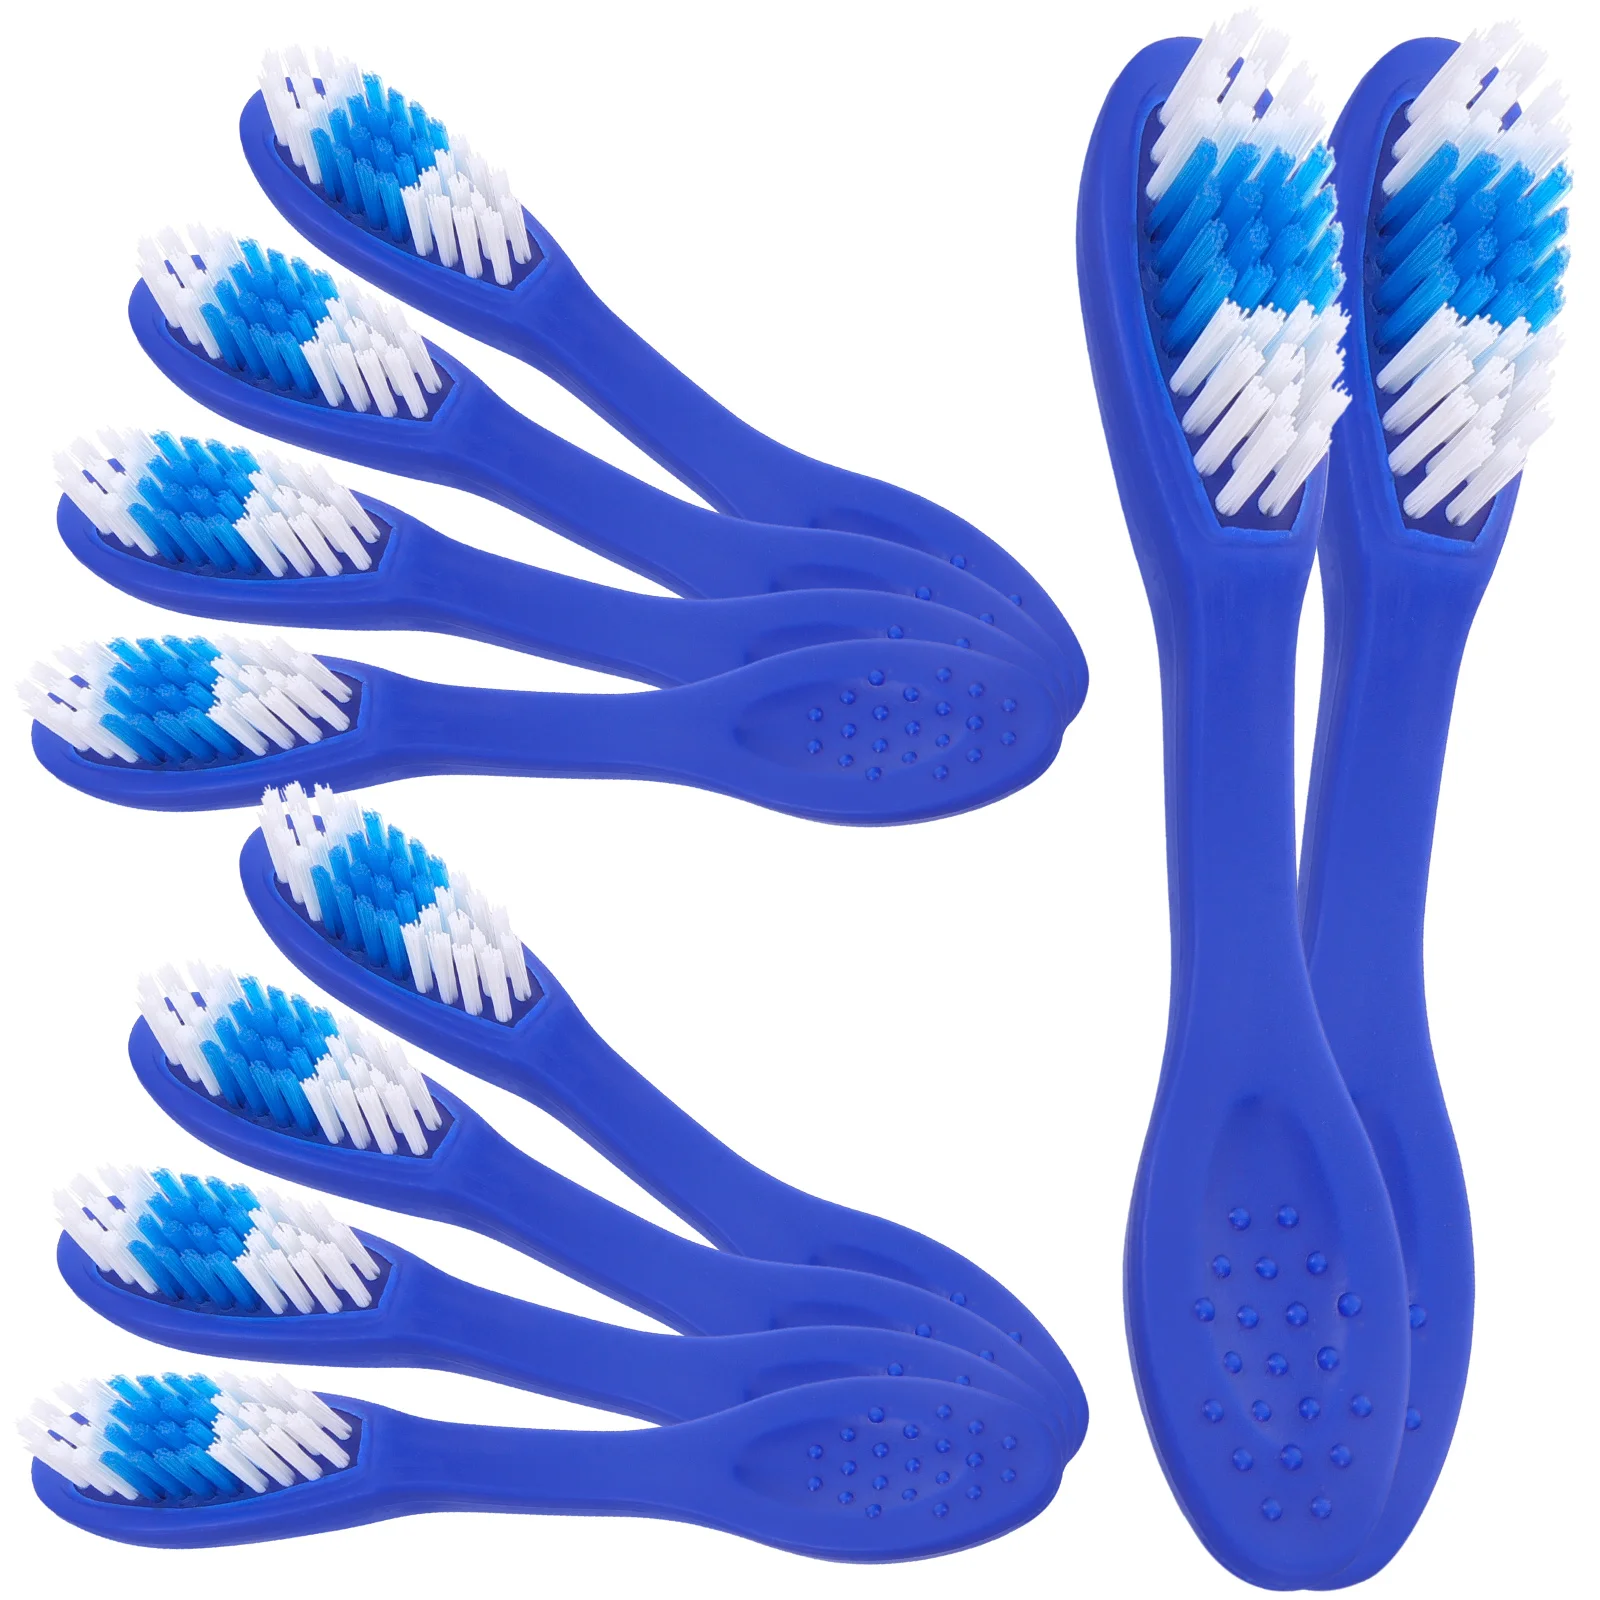 

Handle Toothbrush Thumbprint Security Toothbrush Short Handle Soft Bristles Portable Travel Toothbrush Teeth Cleaning